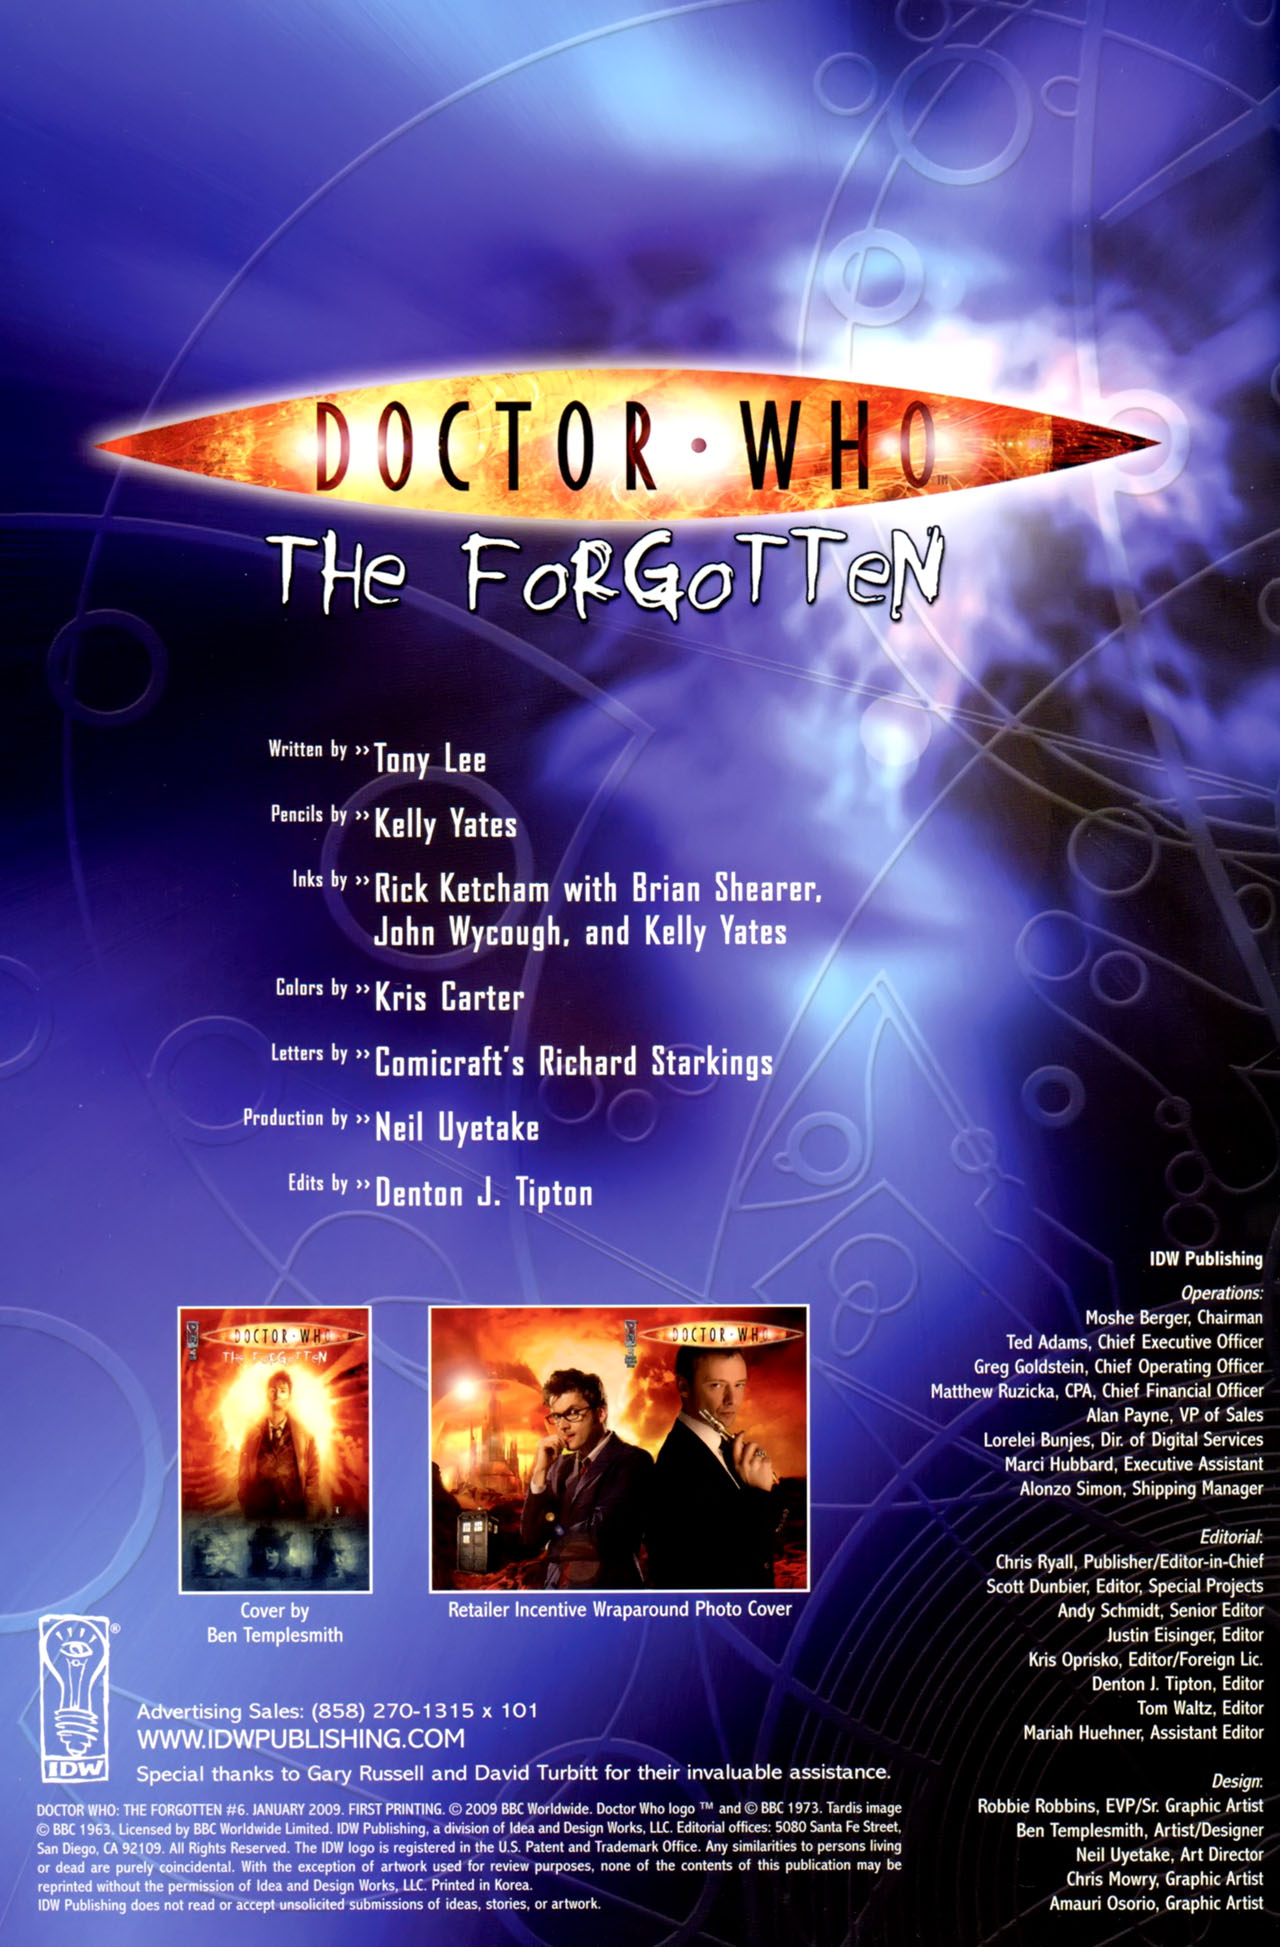 Read online Doctor Who: The Forgotten comic -  Issue #6 - 2